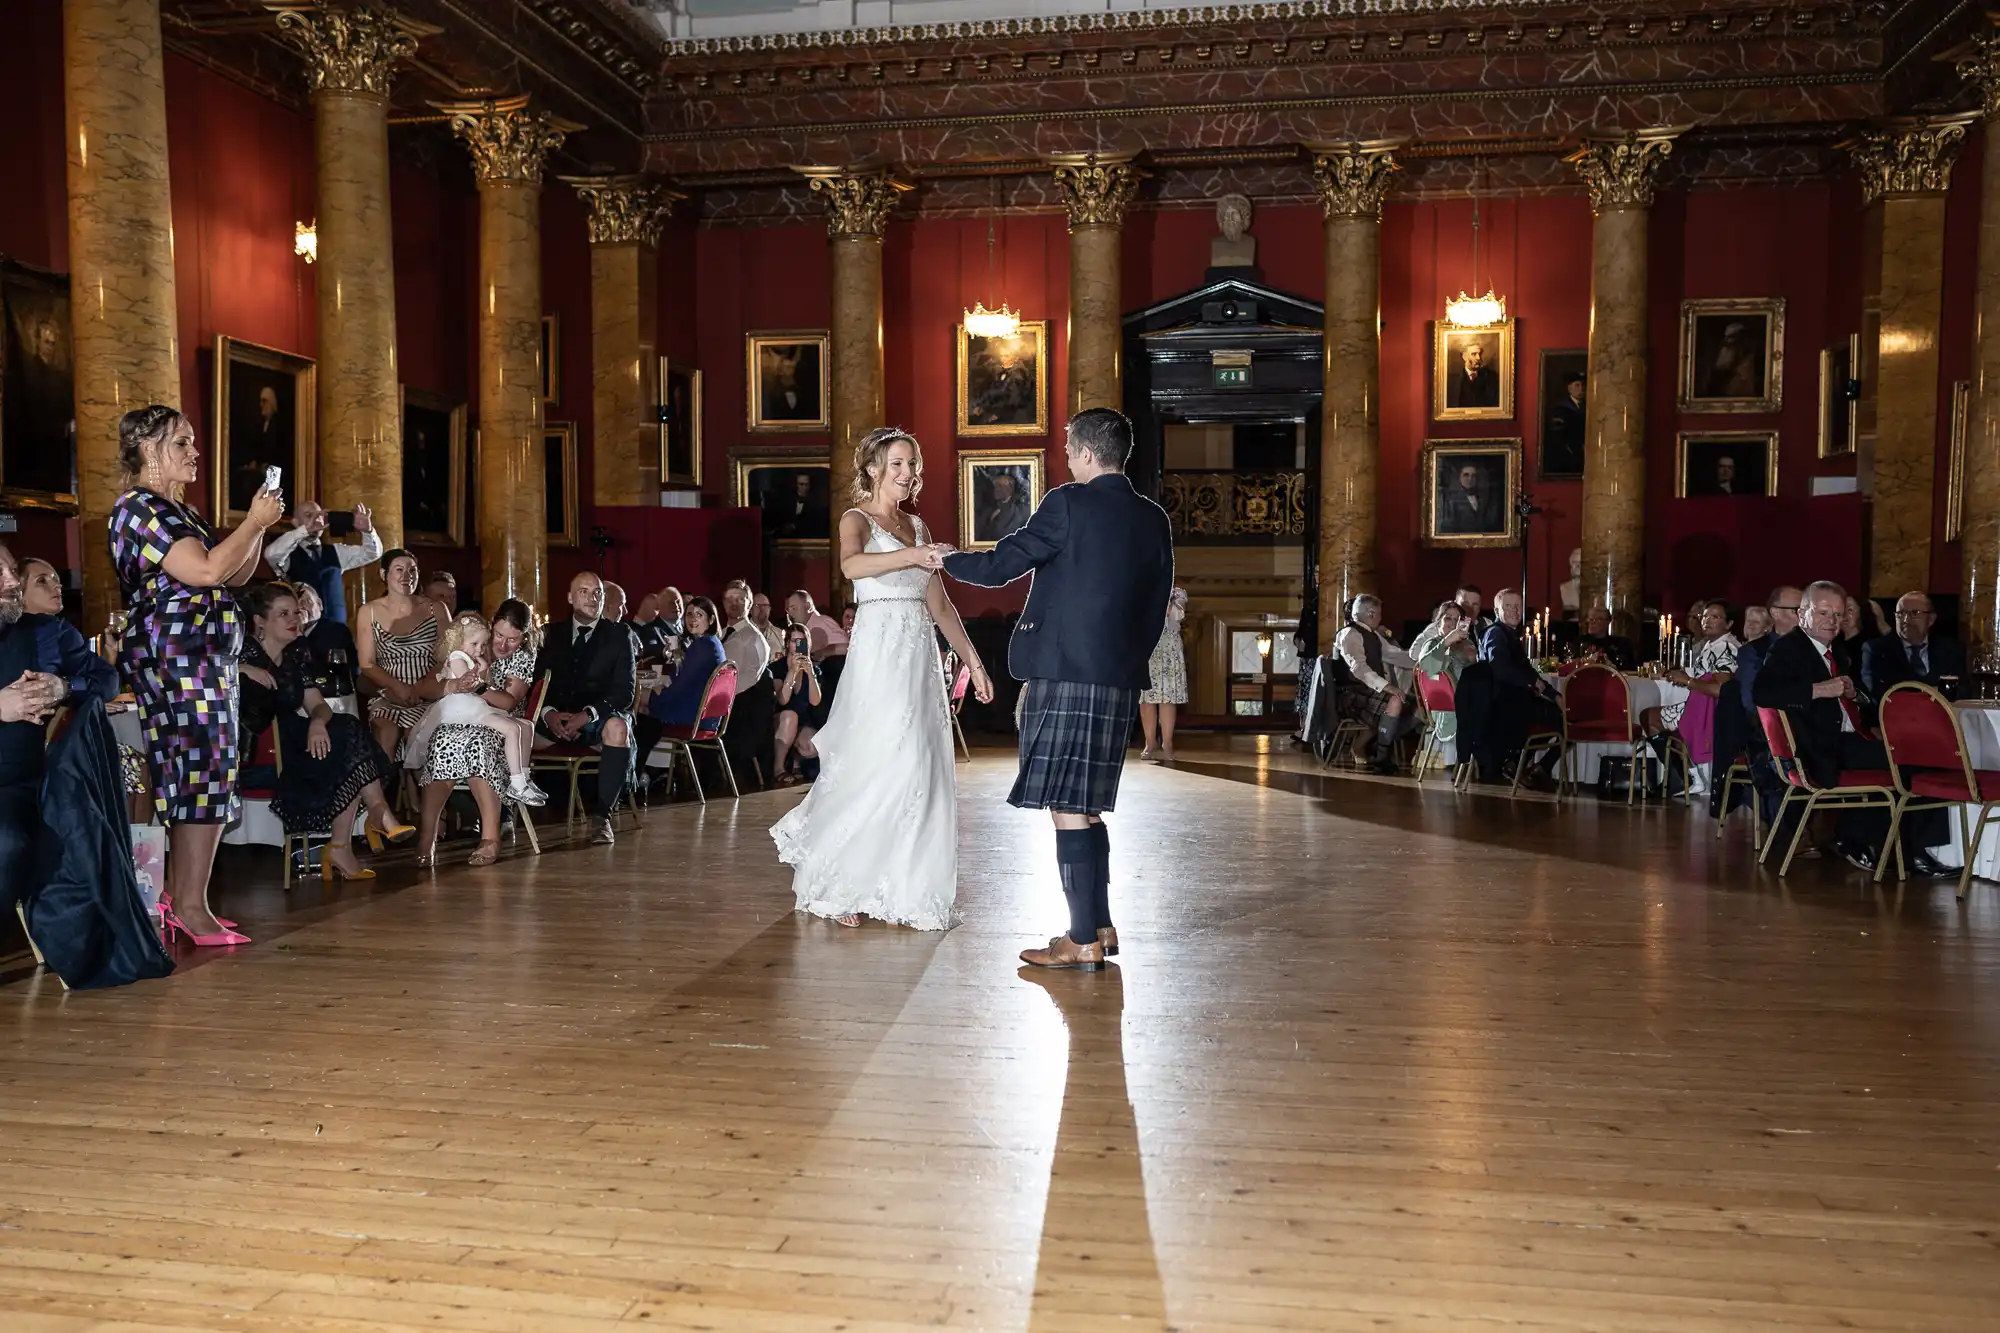 A bride and groom dance in an ornate hall with wooden floors, watched by seated guests. The room features tall columns and framed portraits on the walls.